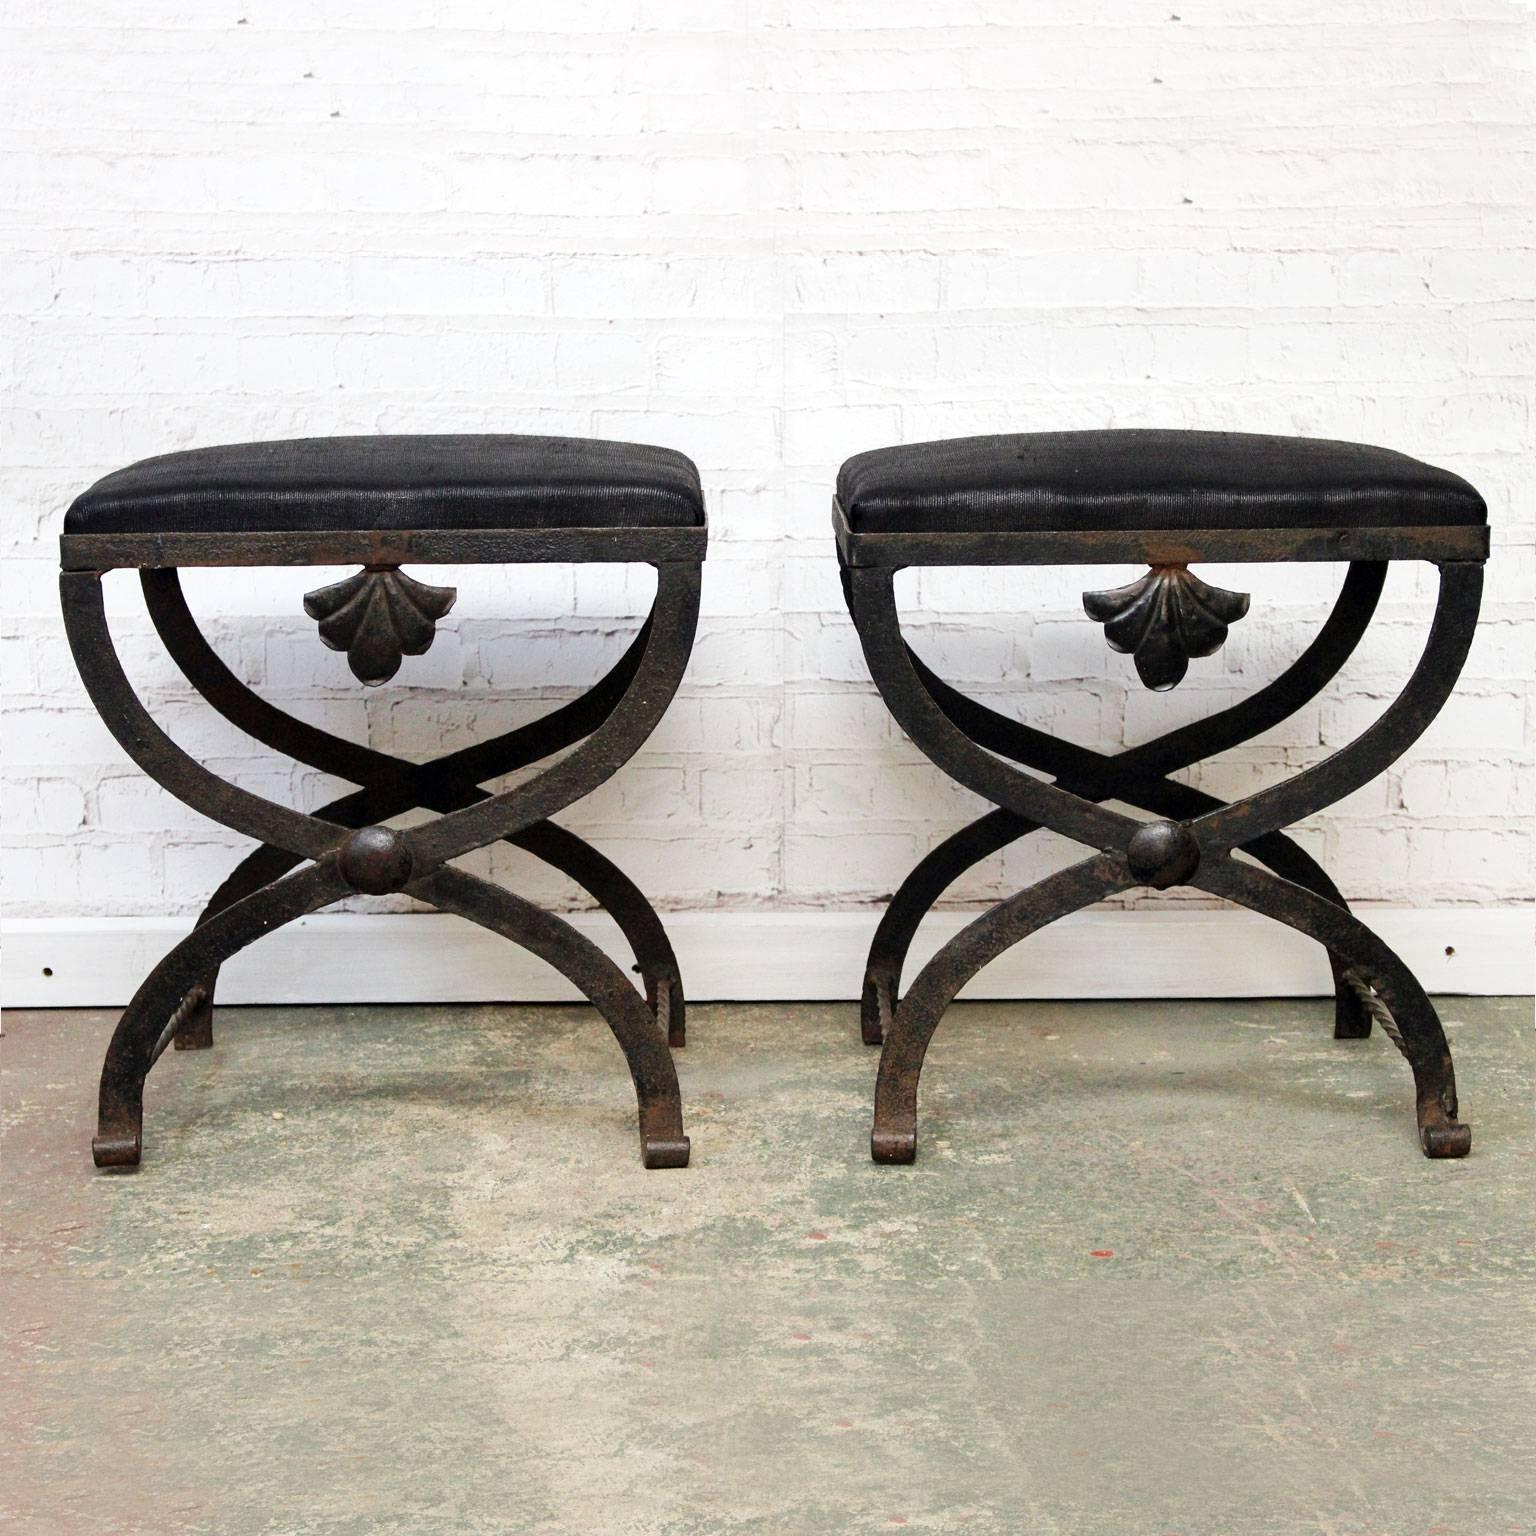 Here we have a rather wonderful pair of black iron stools with lovely shell detail. The black metal has a wonderful patina. We have had them reupholstered in black horsehair-type fabric. We love the lines of the X frame legs.

Basic to the door